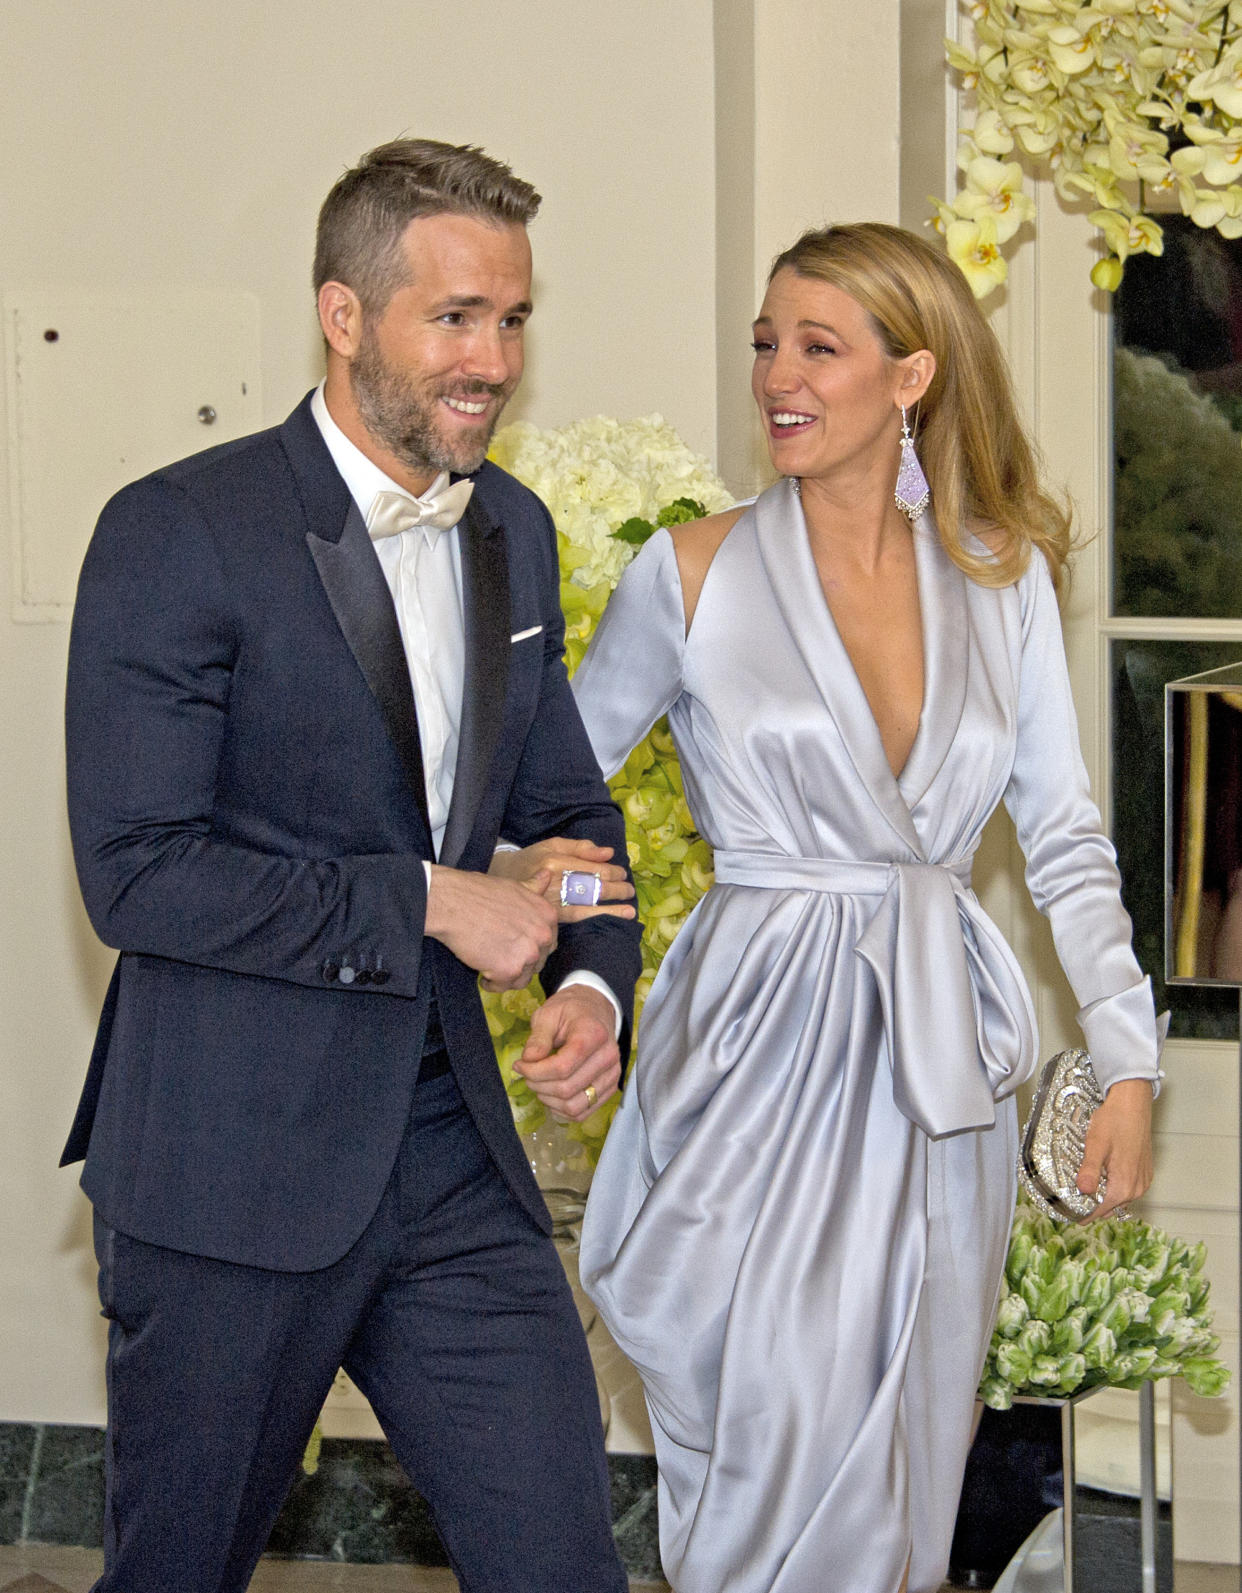 Ryan Reynolds arm-in-arm with Blake Lively at an event